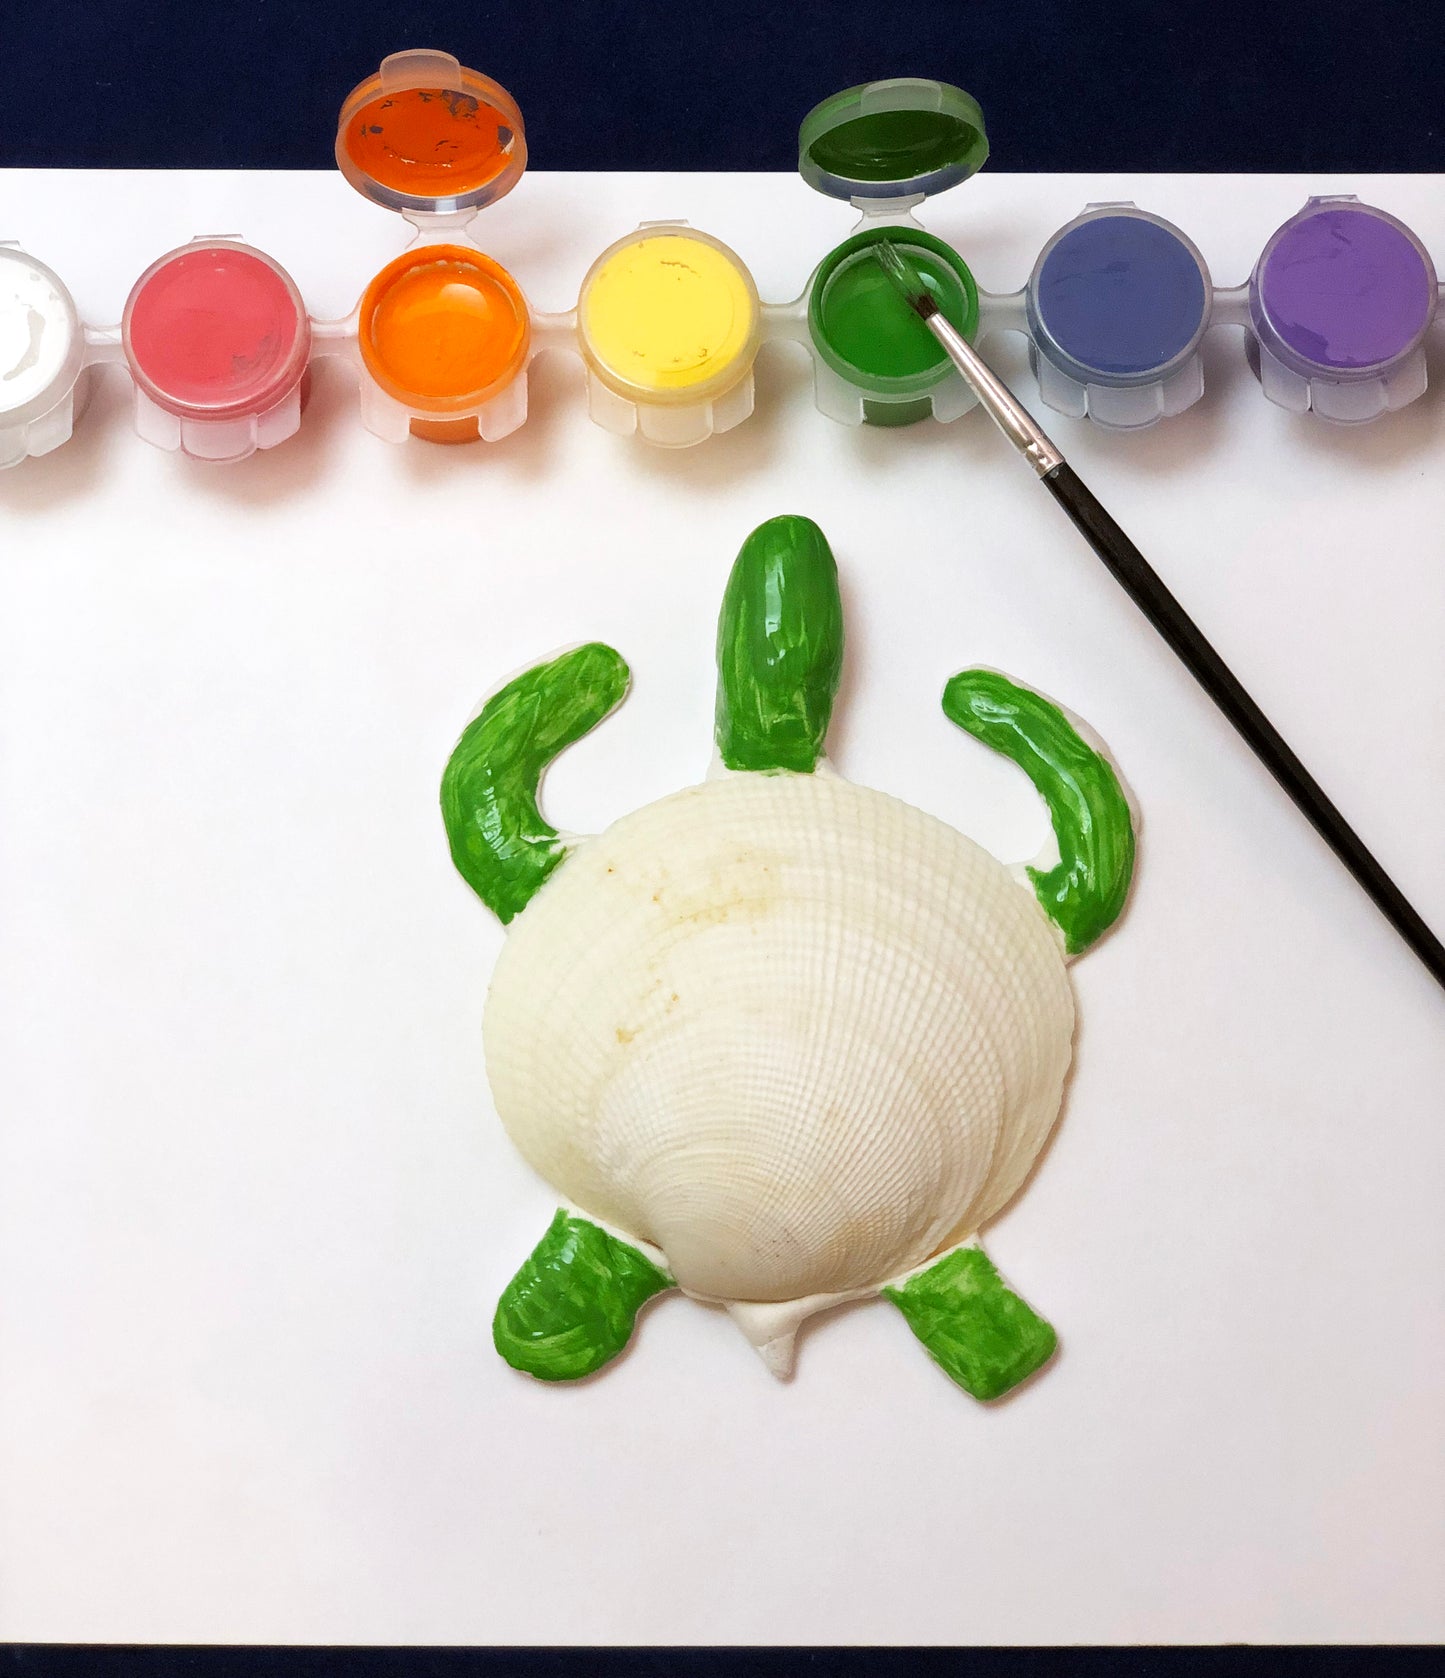 Green sea turtle clay model and life cycle children's art and science activity